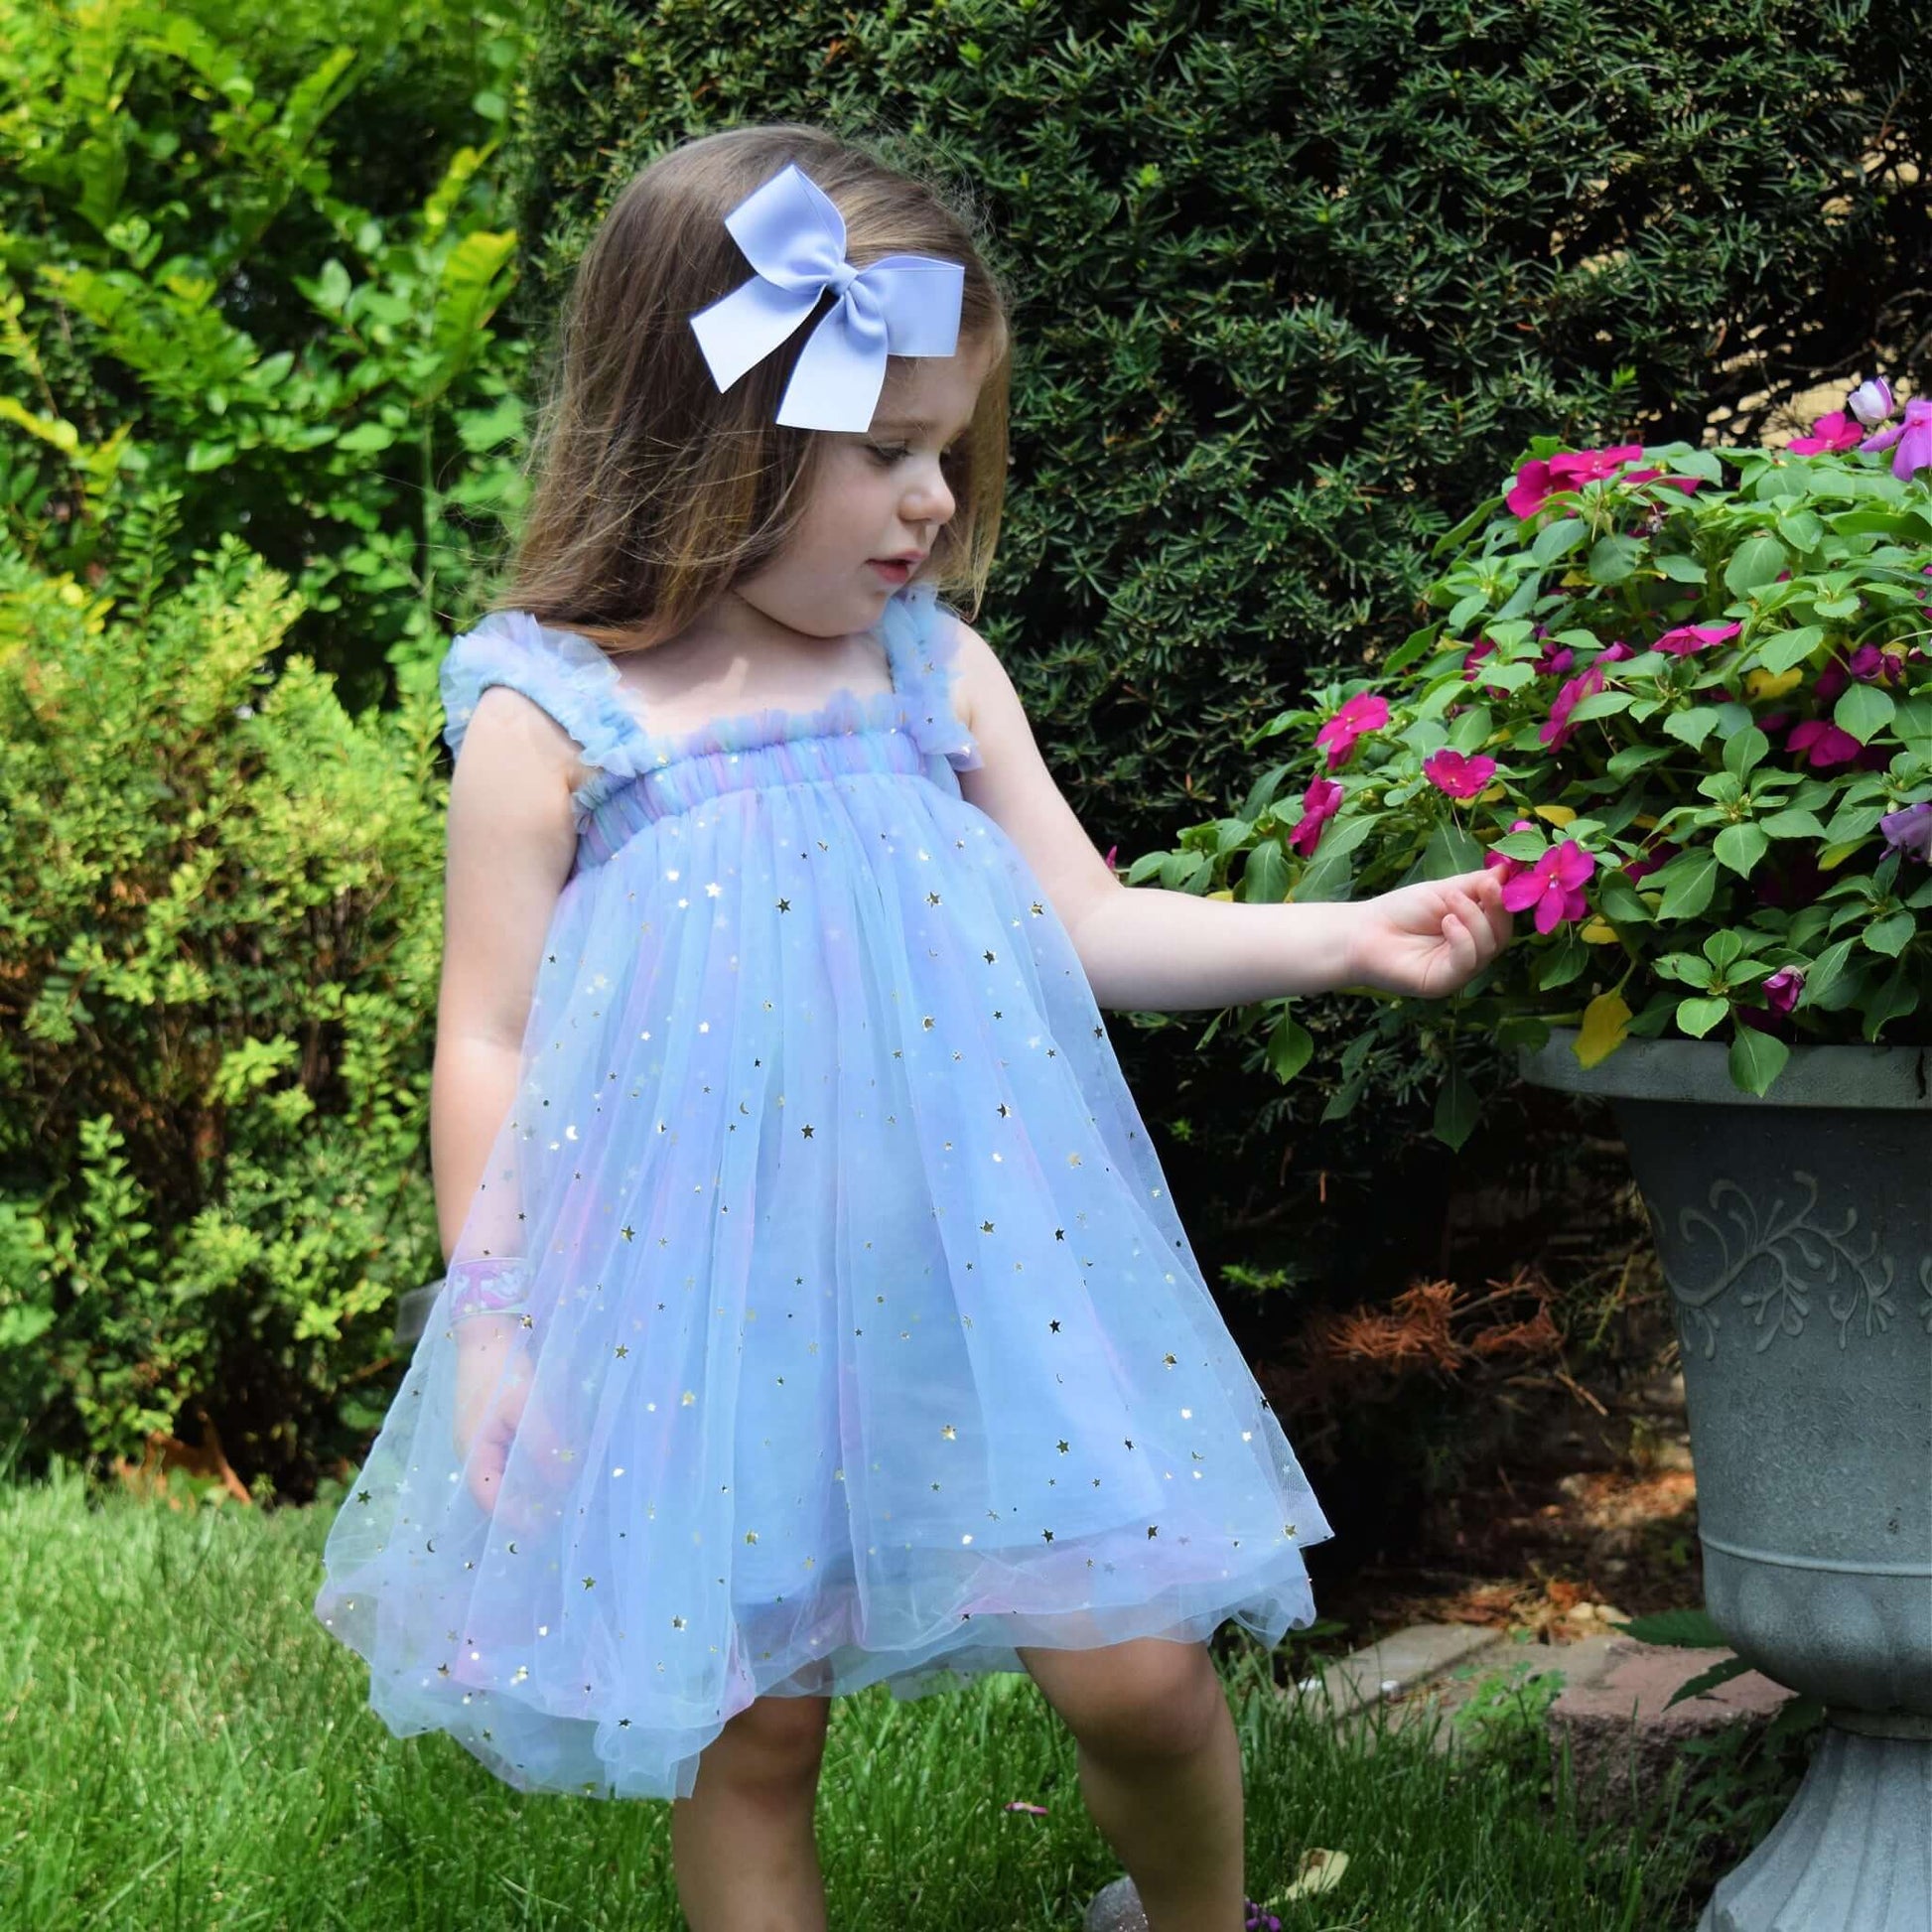 Toddler girl wearing a light blue dress with sparkles and a neutral 4 inch grosgrain sailor bow, standing next to a potted plant.